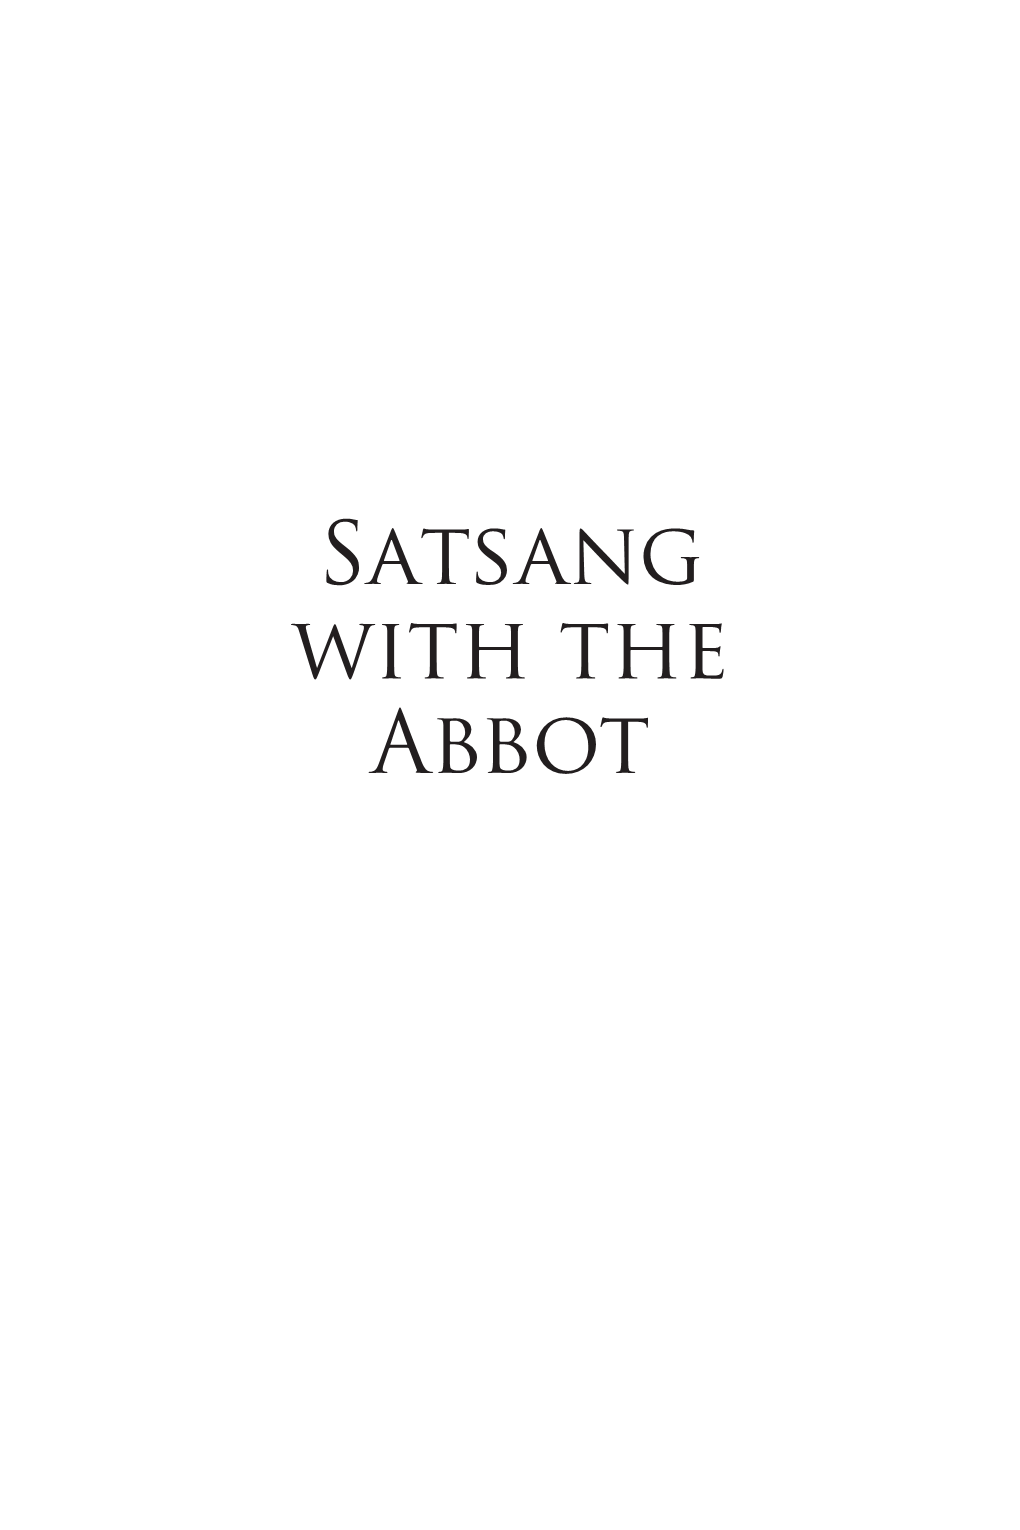 Satsang with the Abbot